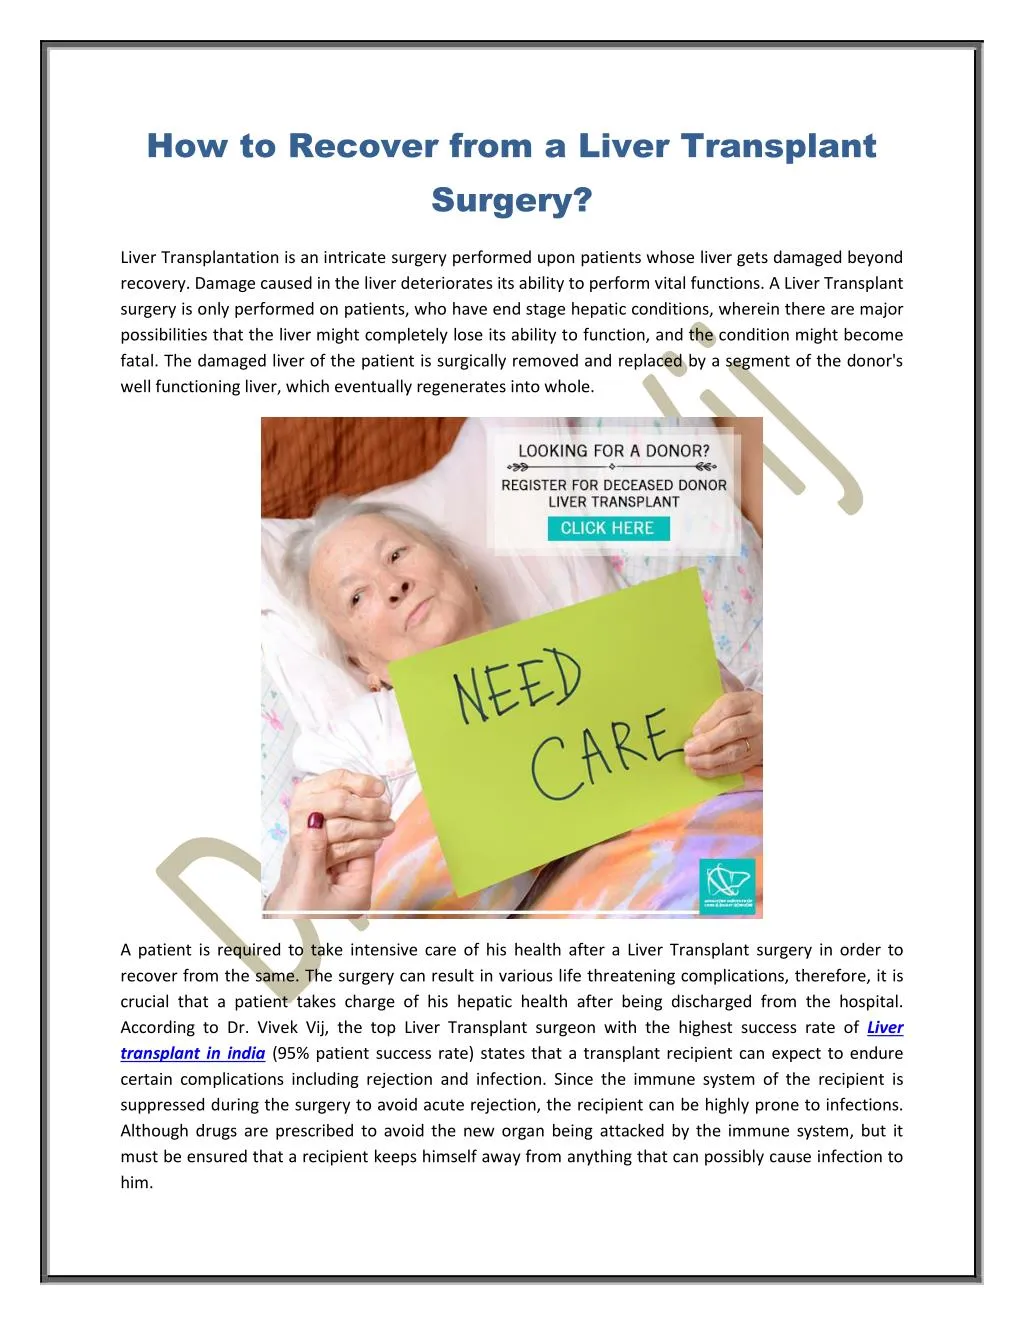 how to recover from a liver transplant surgery